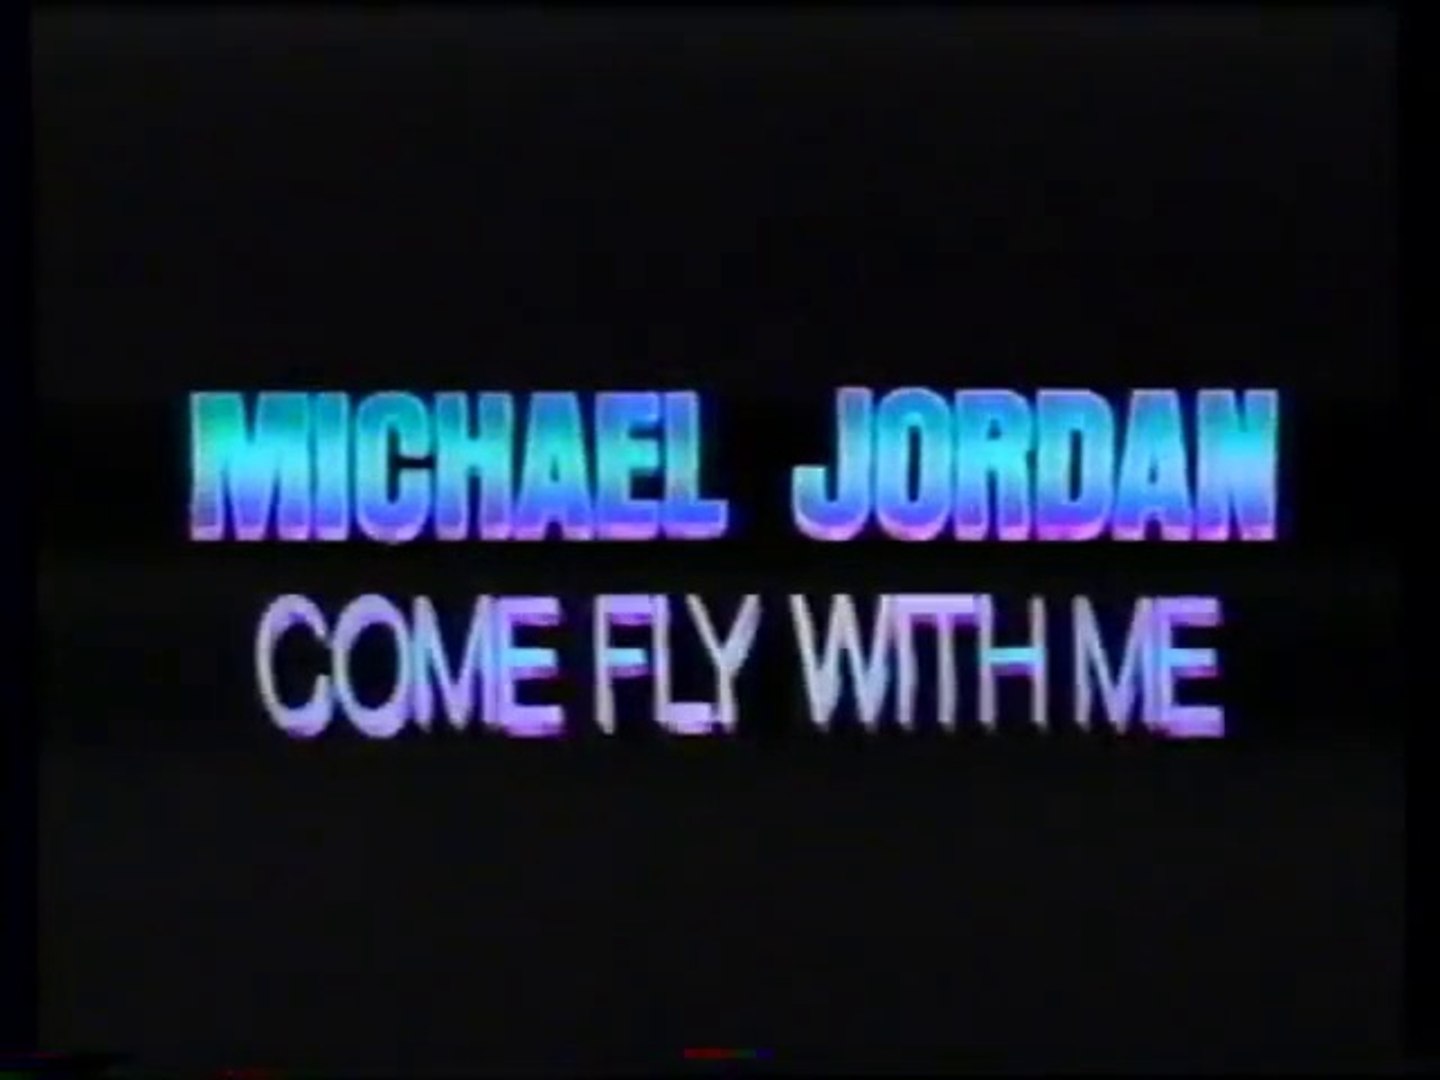 jordan come fly with me